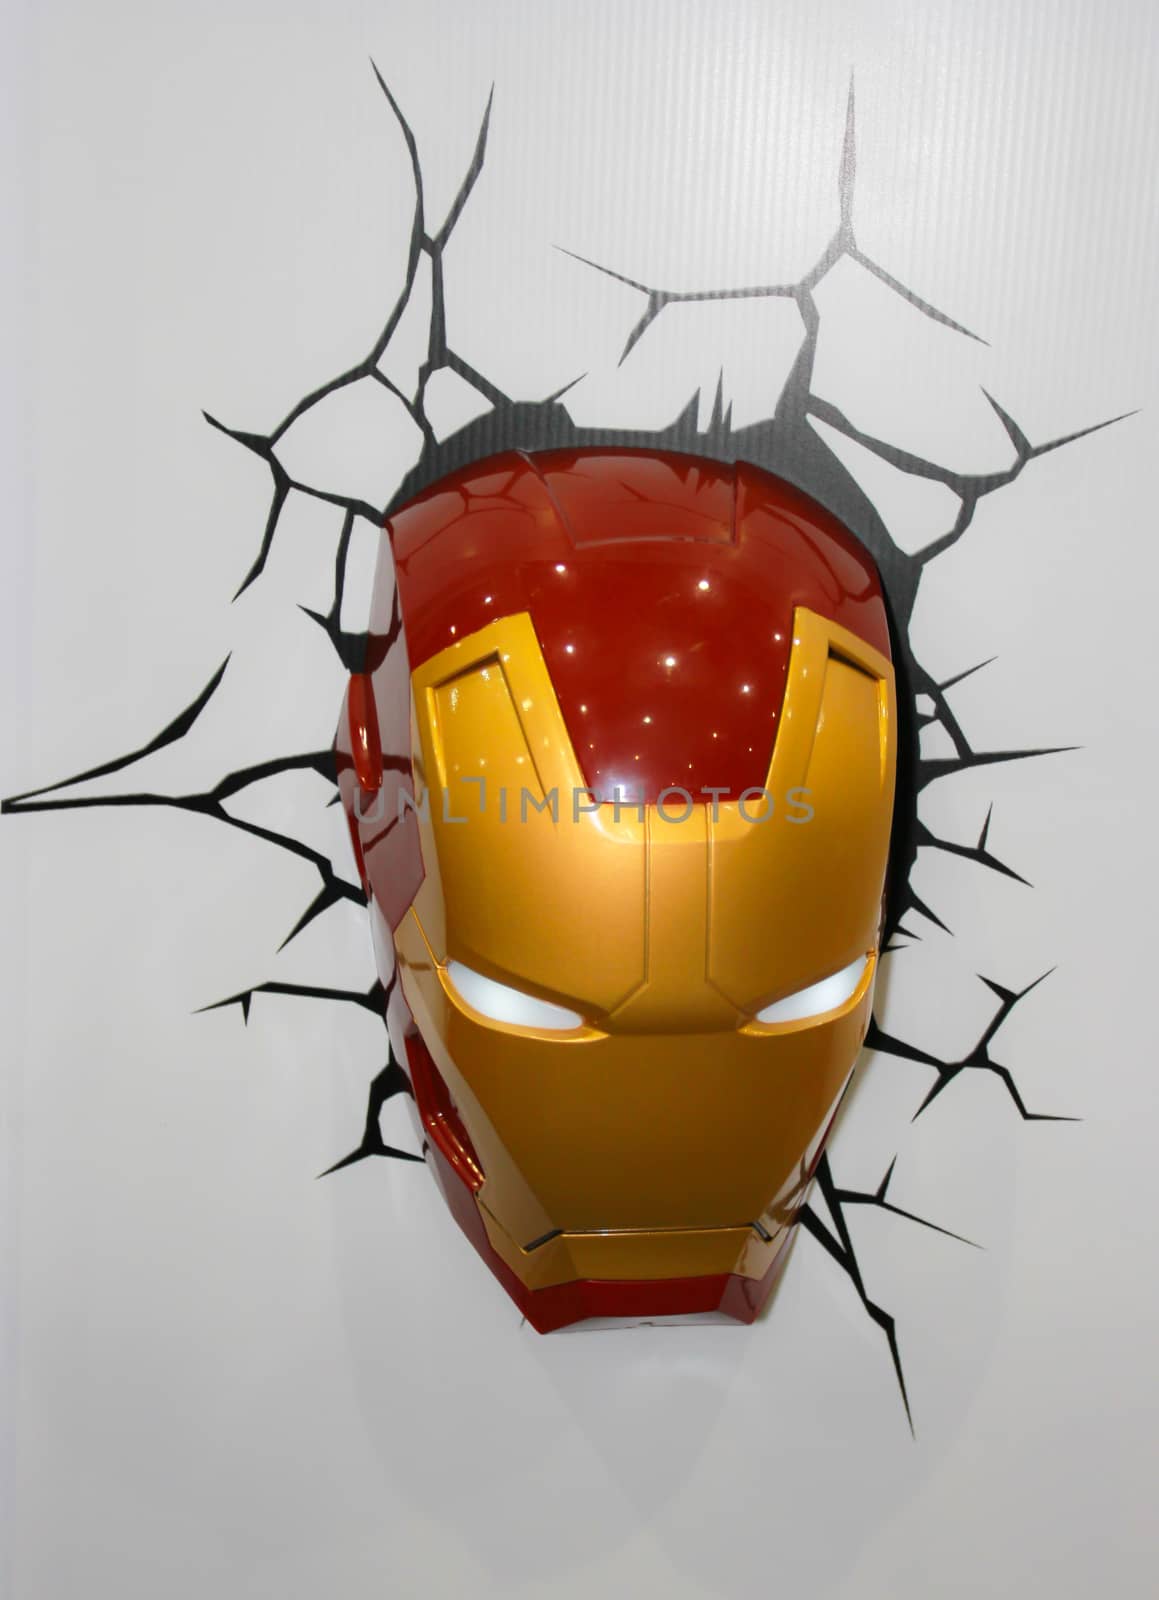 A model of the Iron Man Mask from the movies and comics  by redthirteen